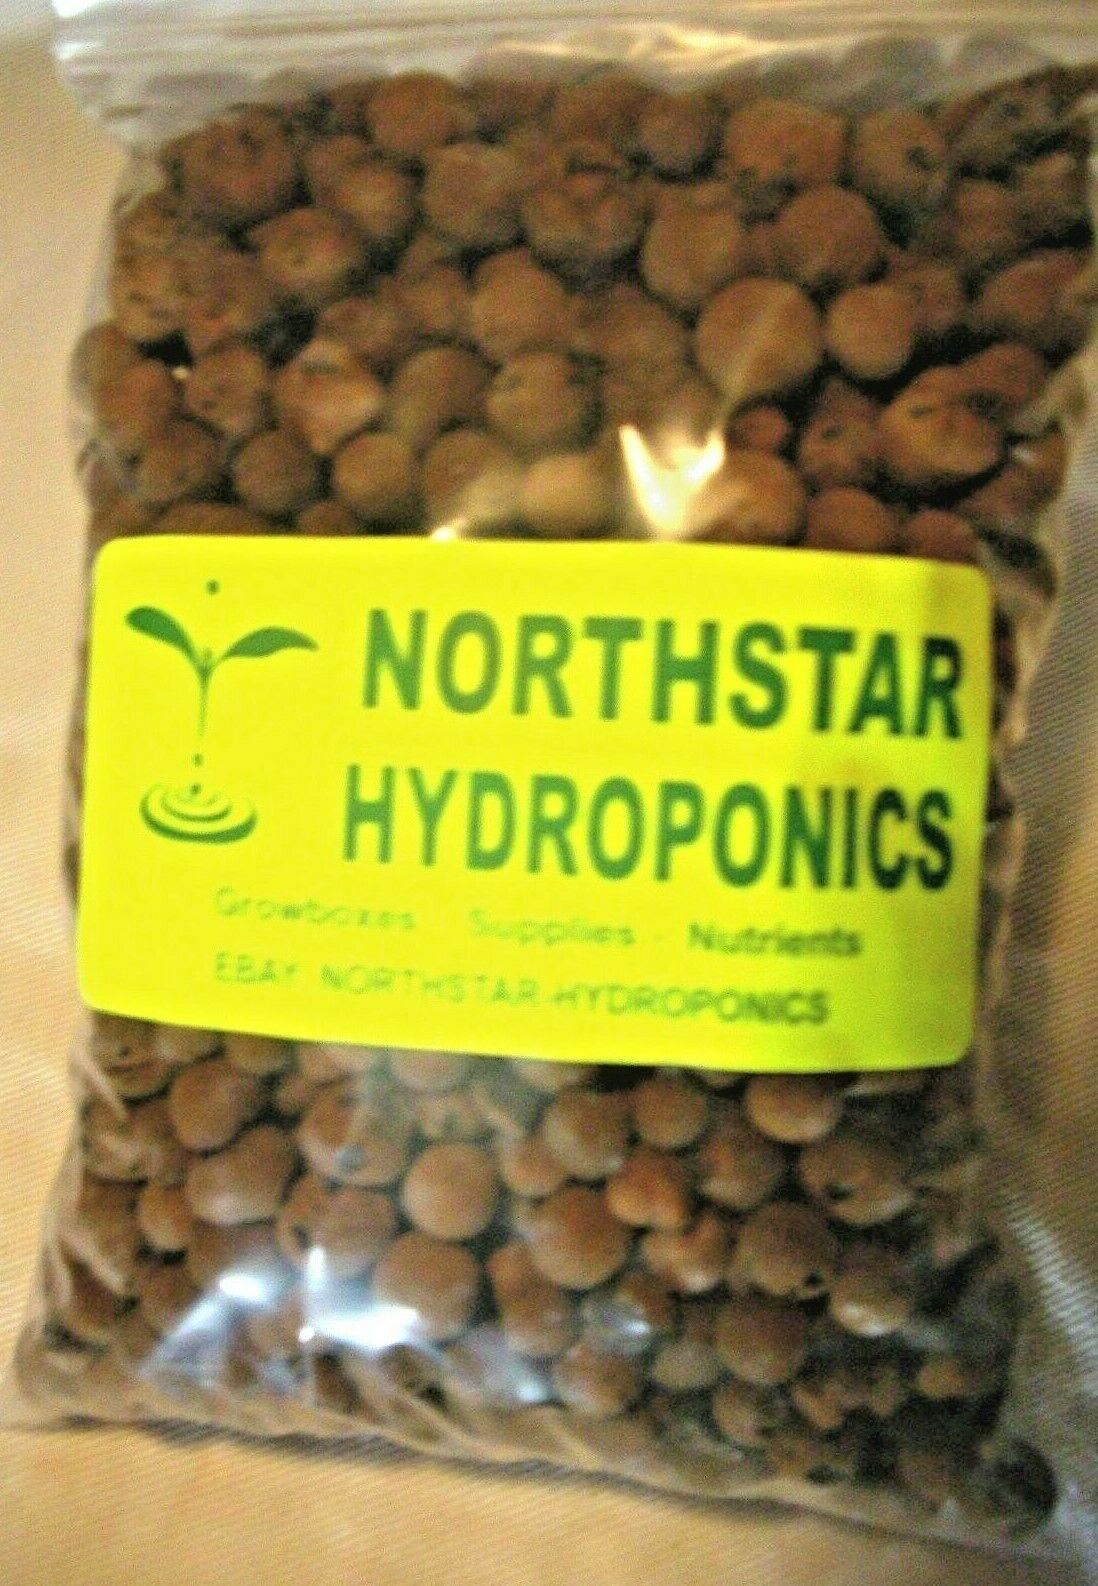 HYDROPONIC SYSTEMS EXPANDED CLAY PEBBLES ROCKS GROW MEDIA LITRE MEASUREMENTS